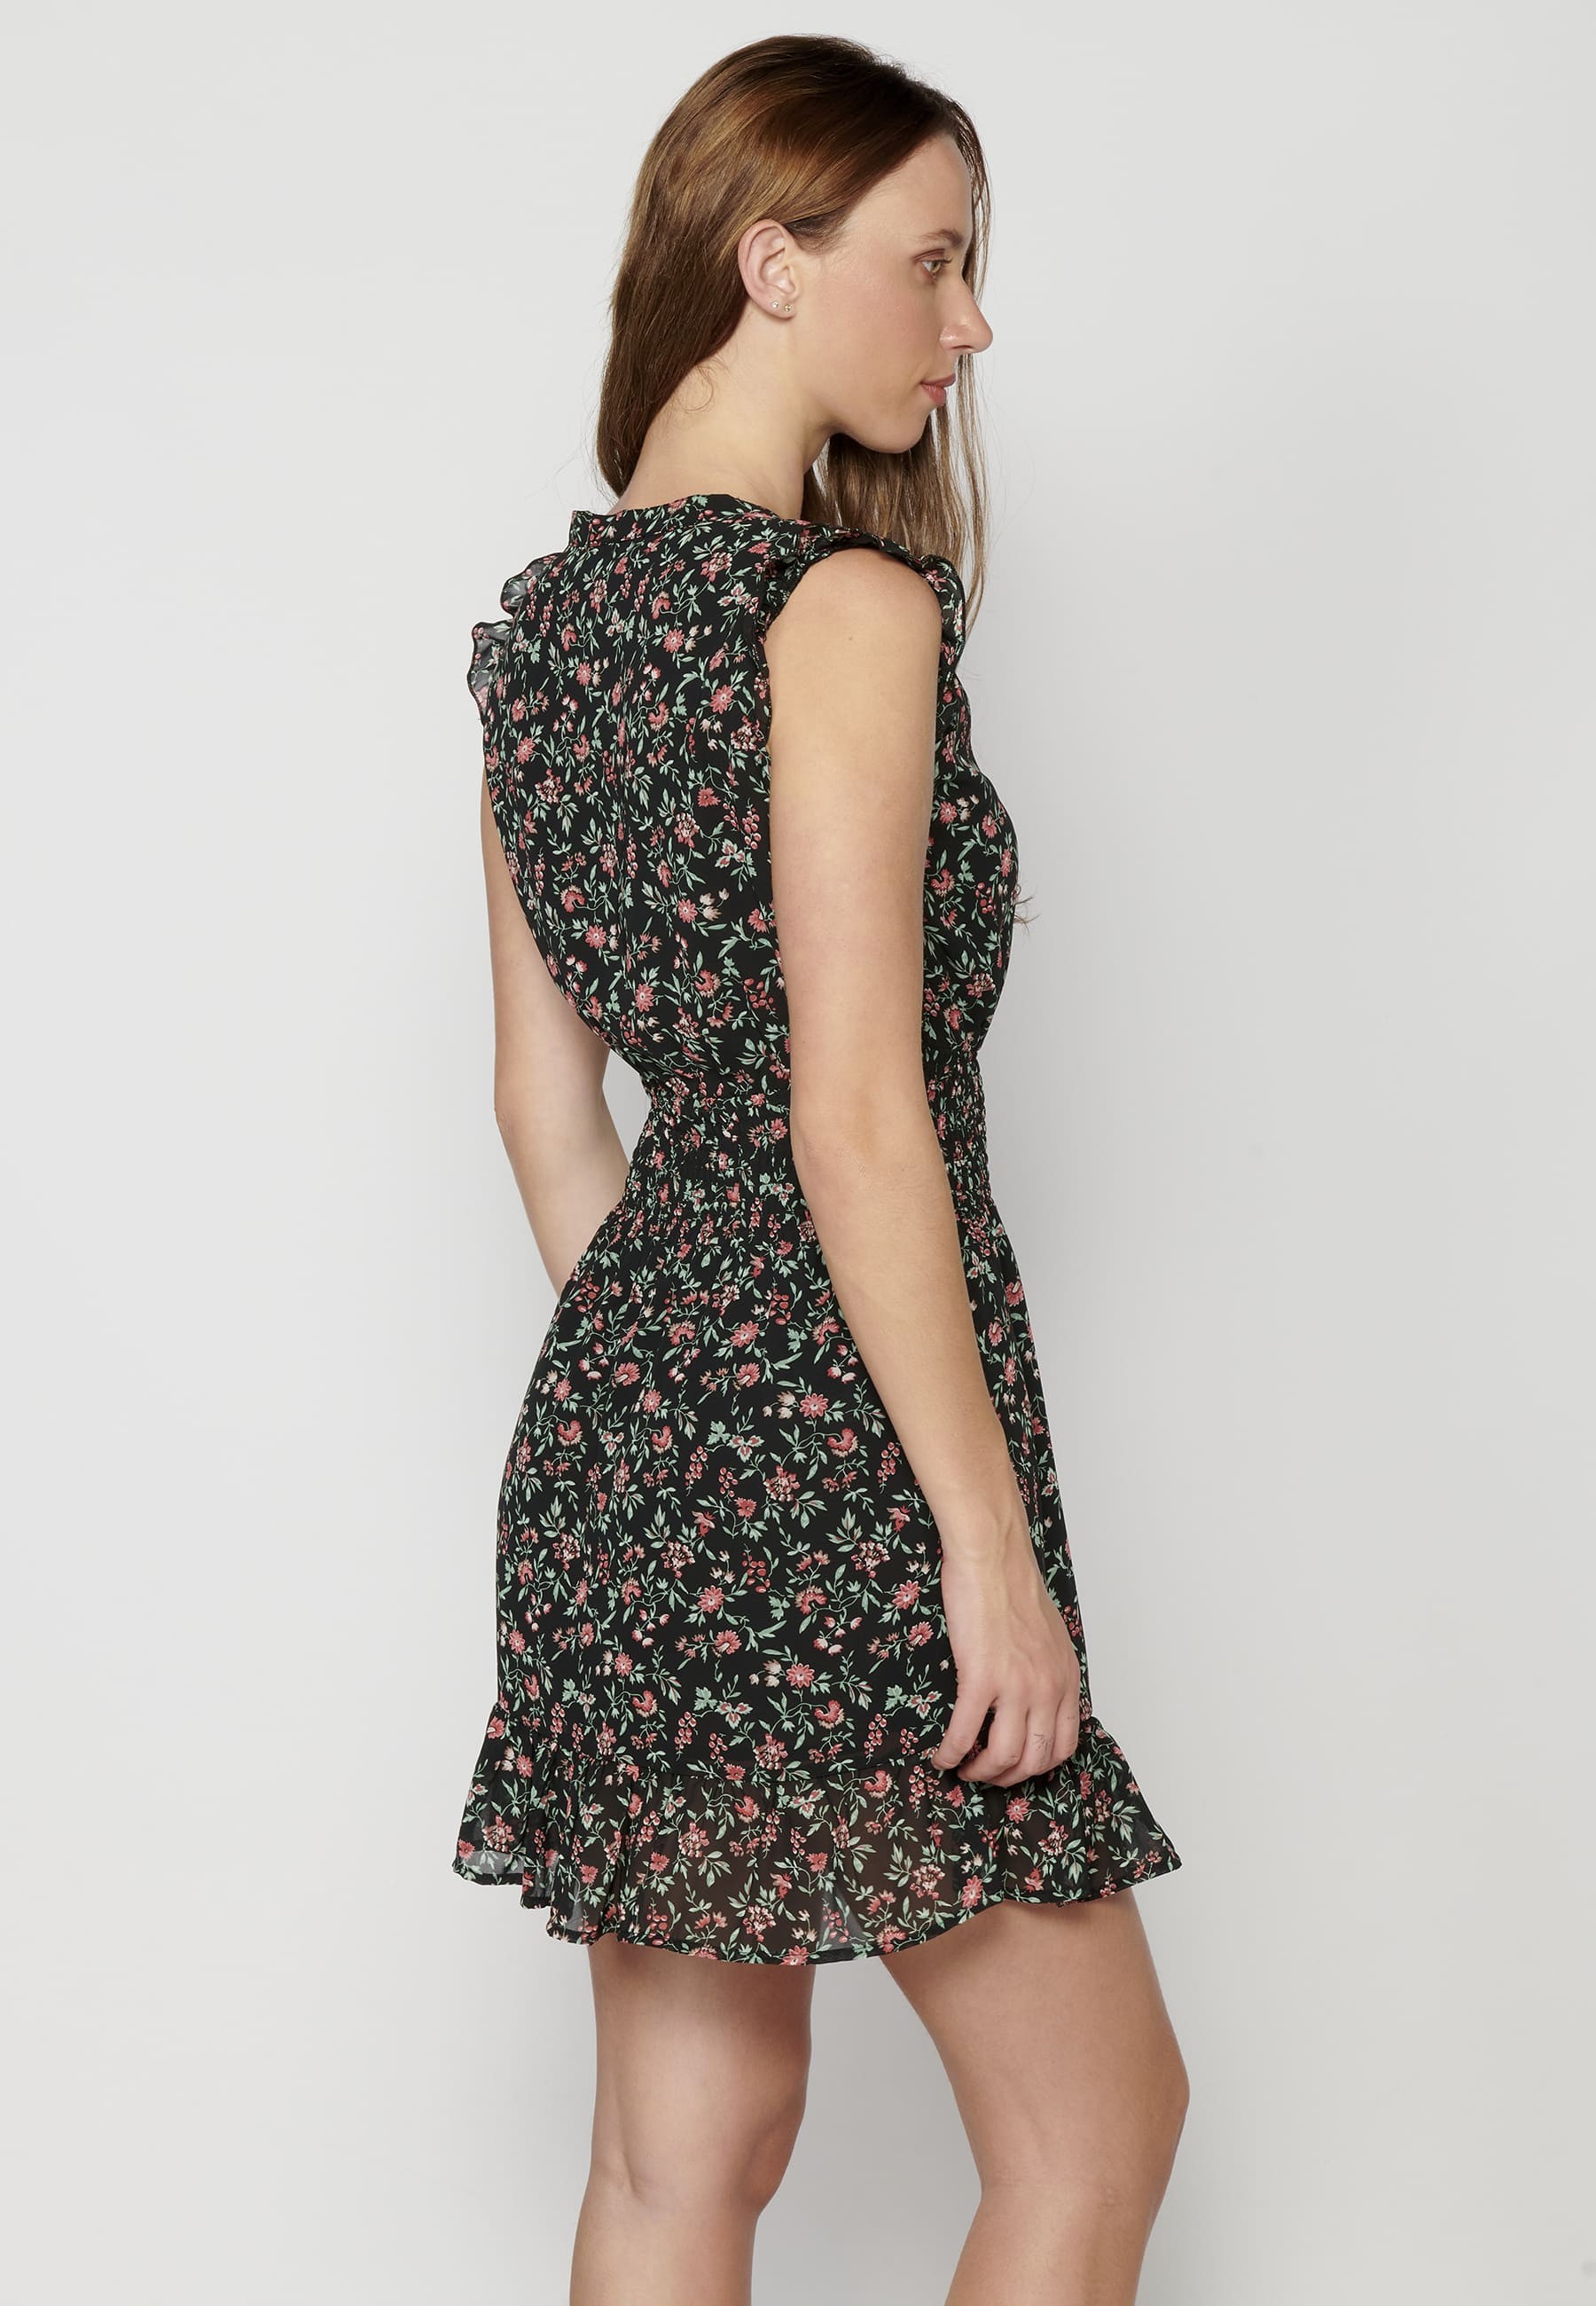 Fluid short-sleeved dress with black floral print for Woman